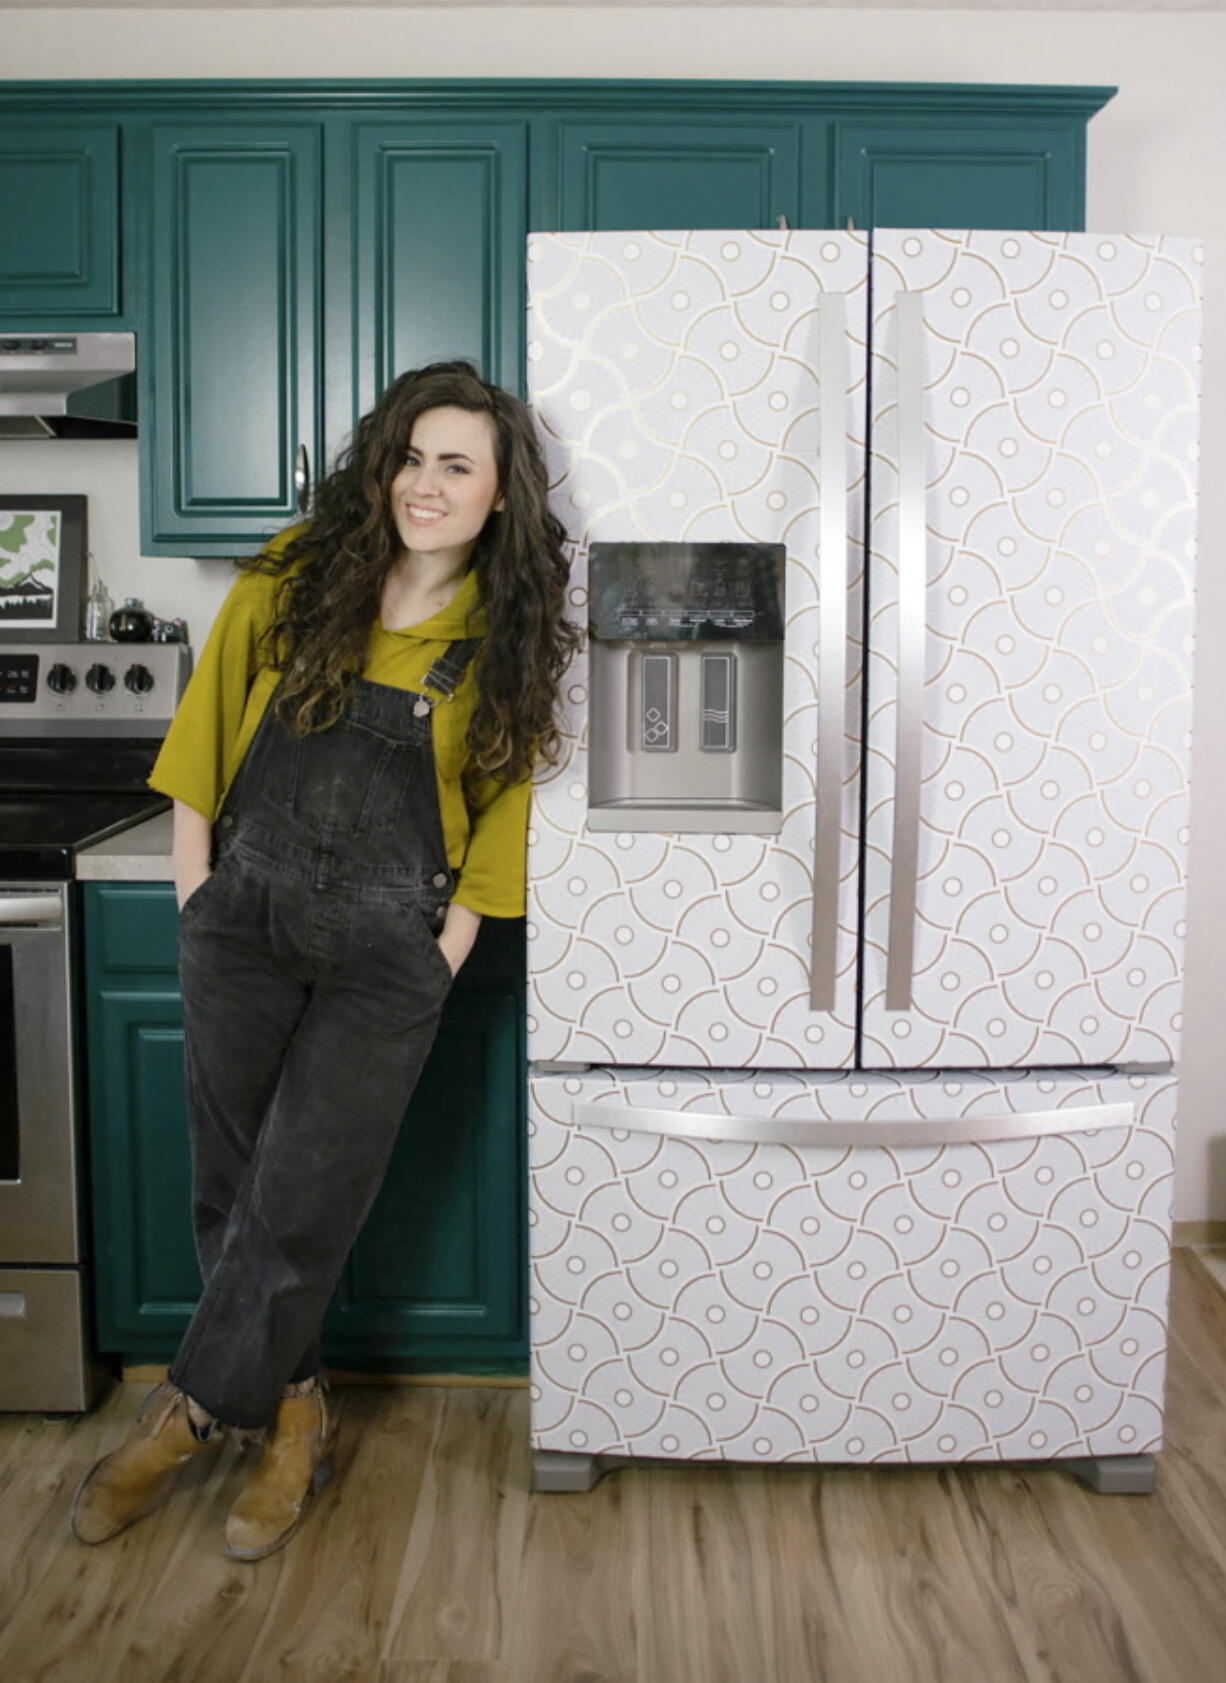 Designer Liz Morrow stands next to her refrigerator covered with a stylish patterned Tempaper removable paper at her home in Tacoma.